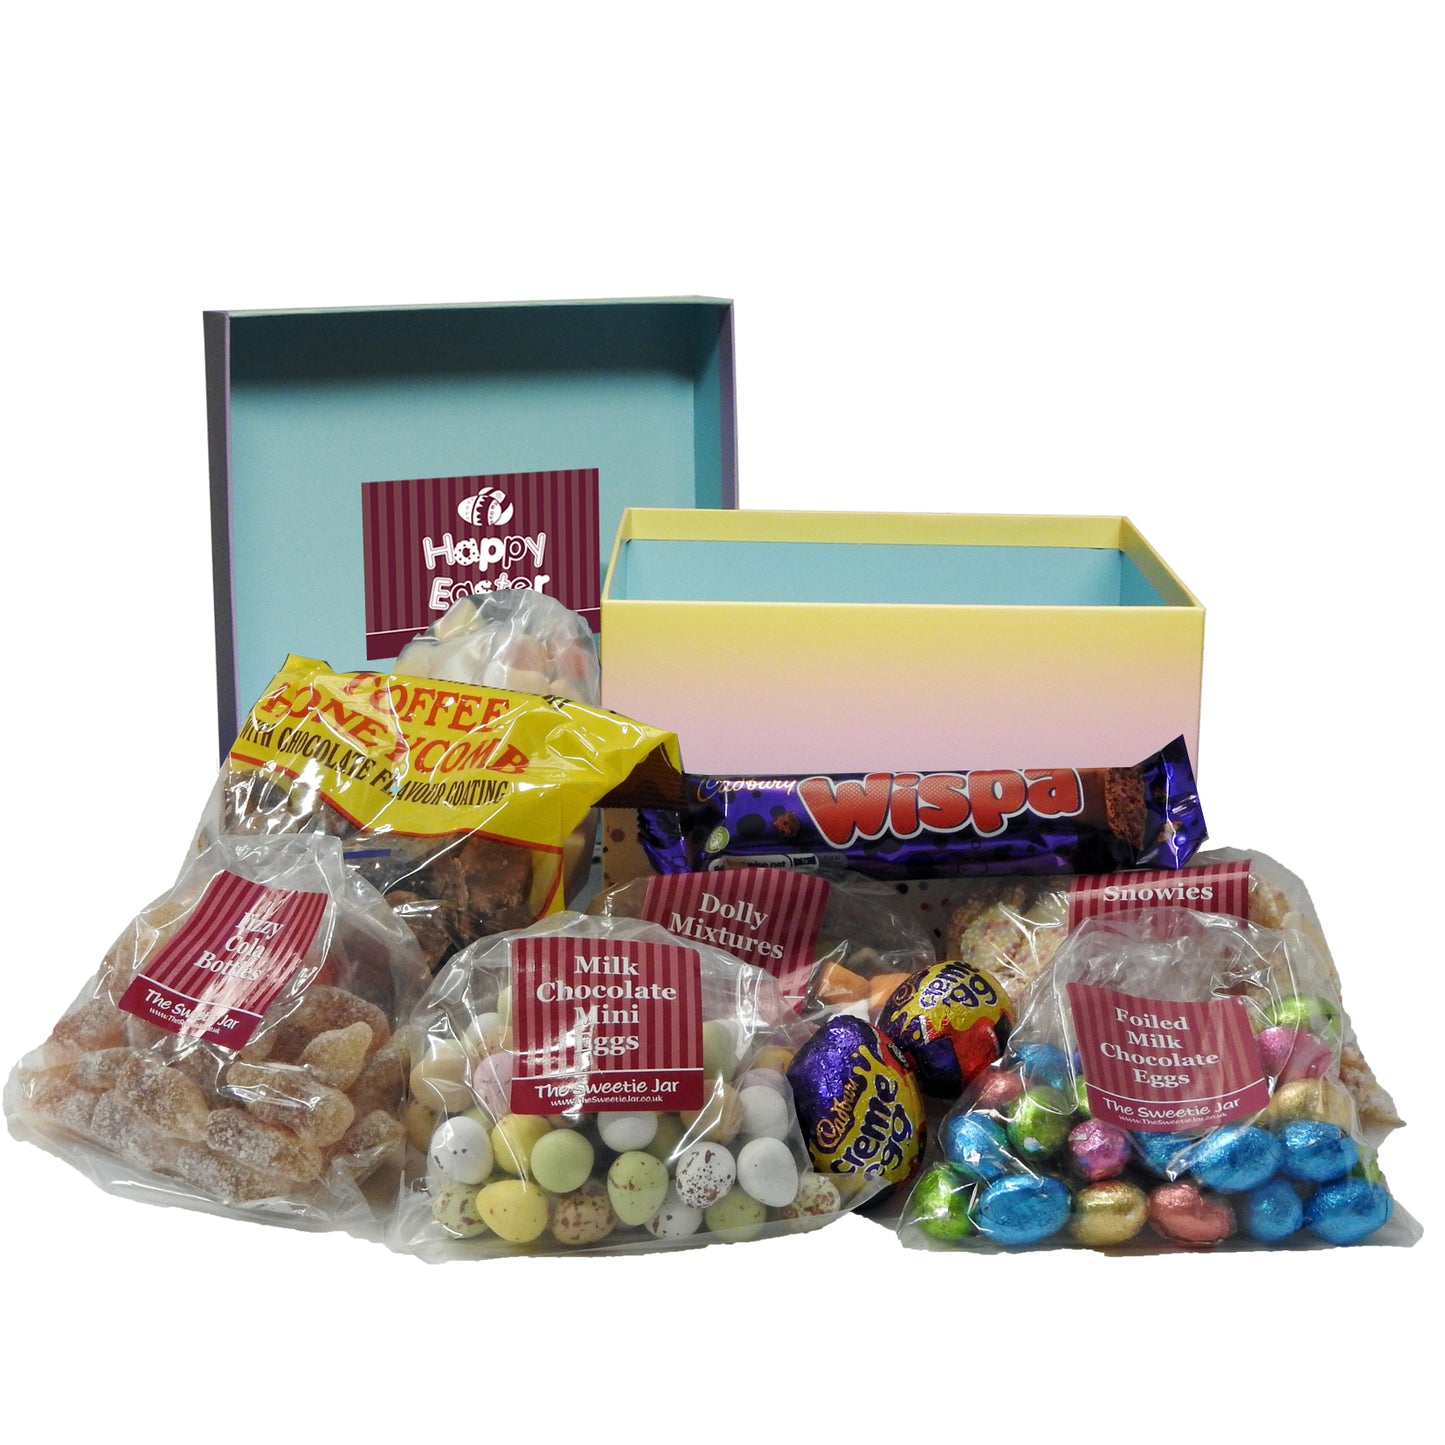 Happy Easter Gift Box - Retro Sweets Gifts at The Sweetie Jar